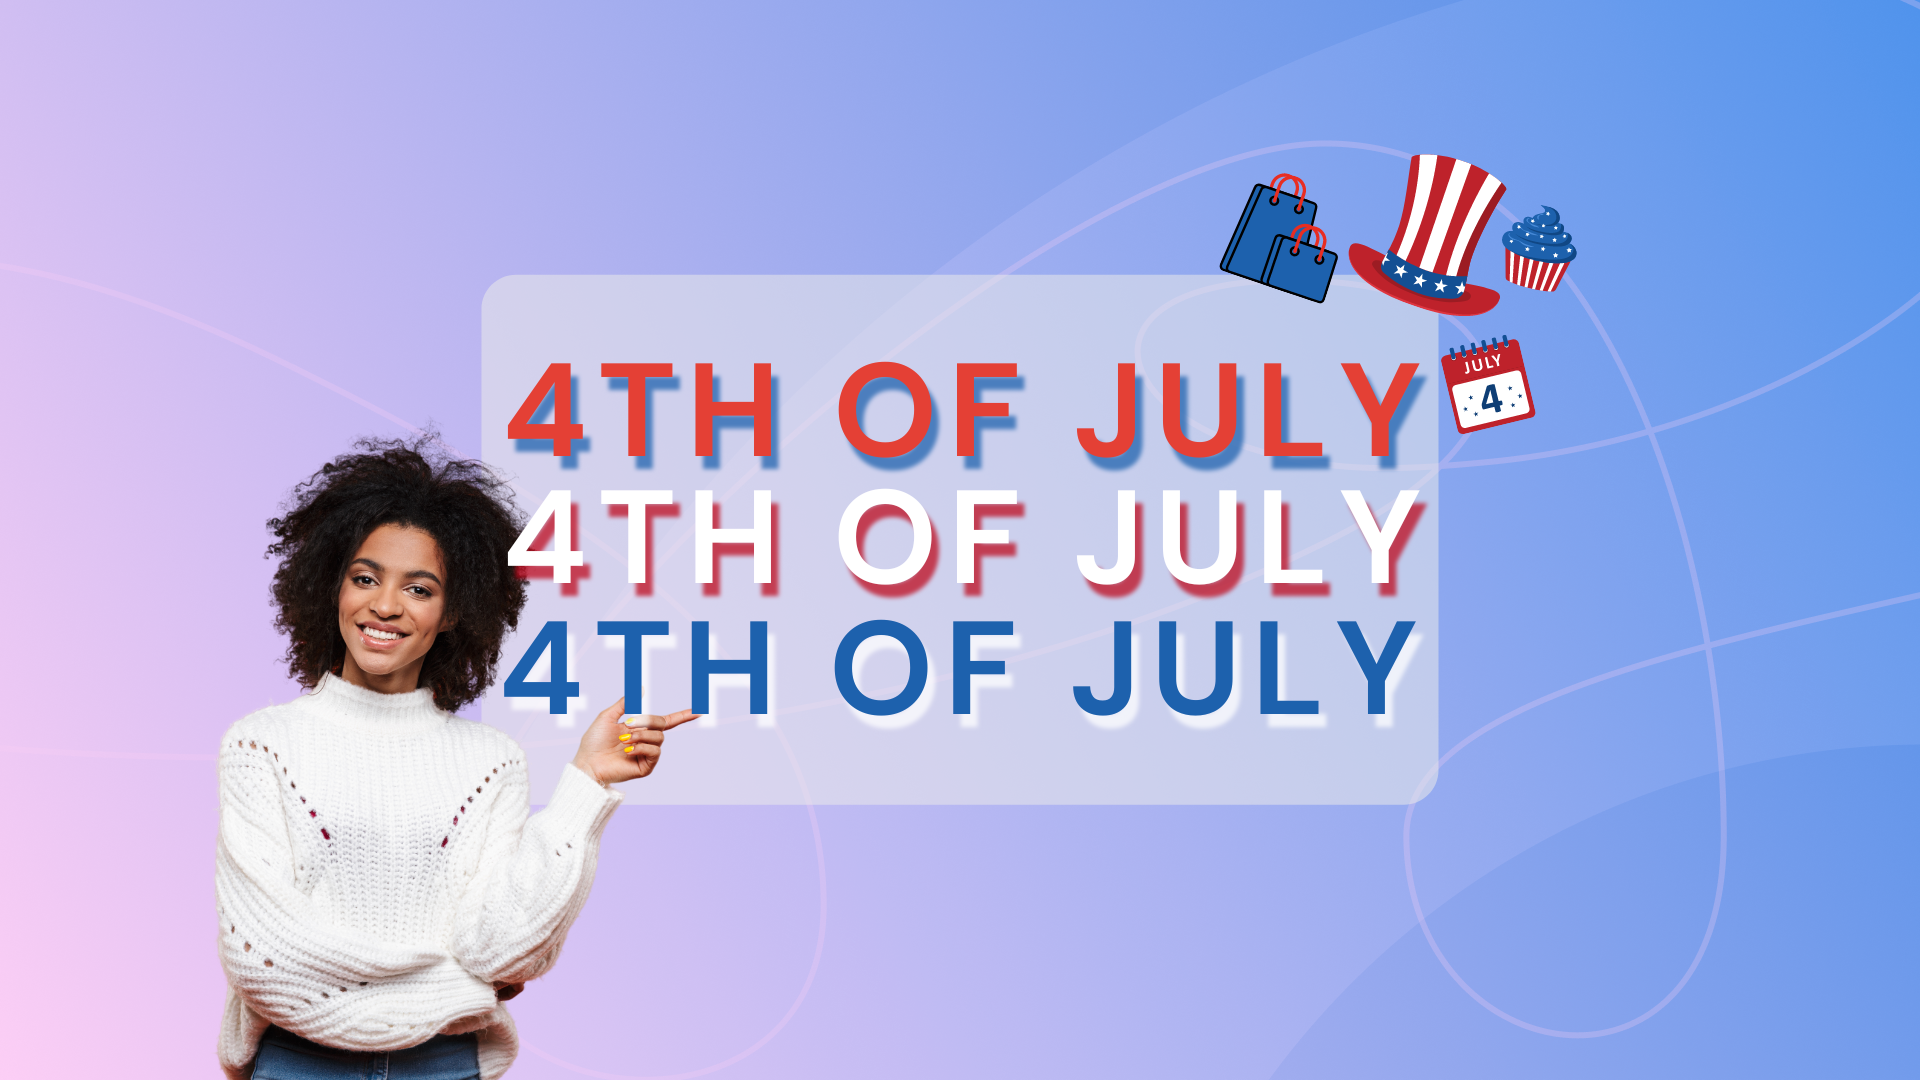 Image of 4th of July icons and woman pointing to text